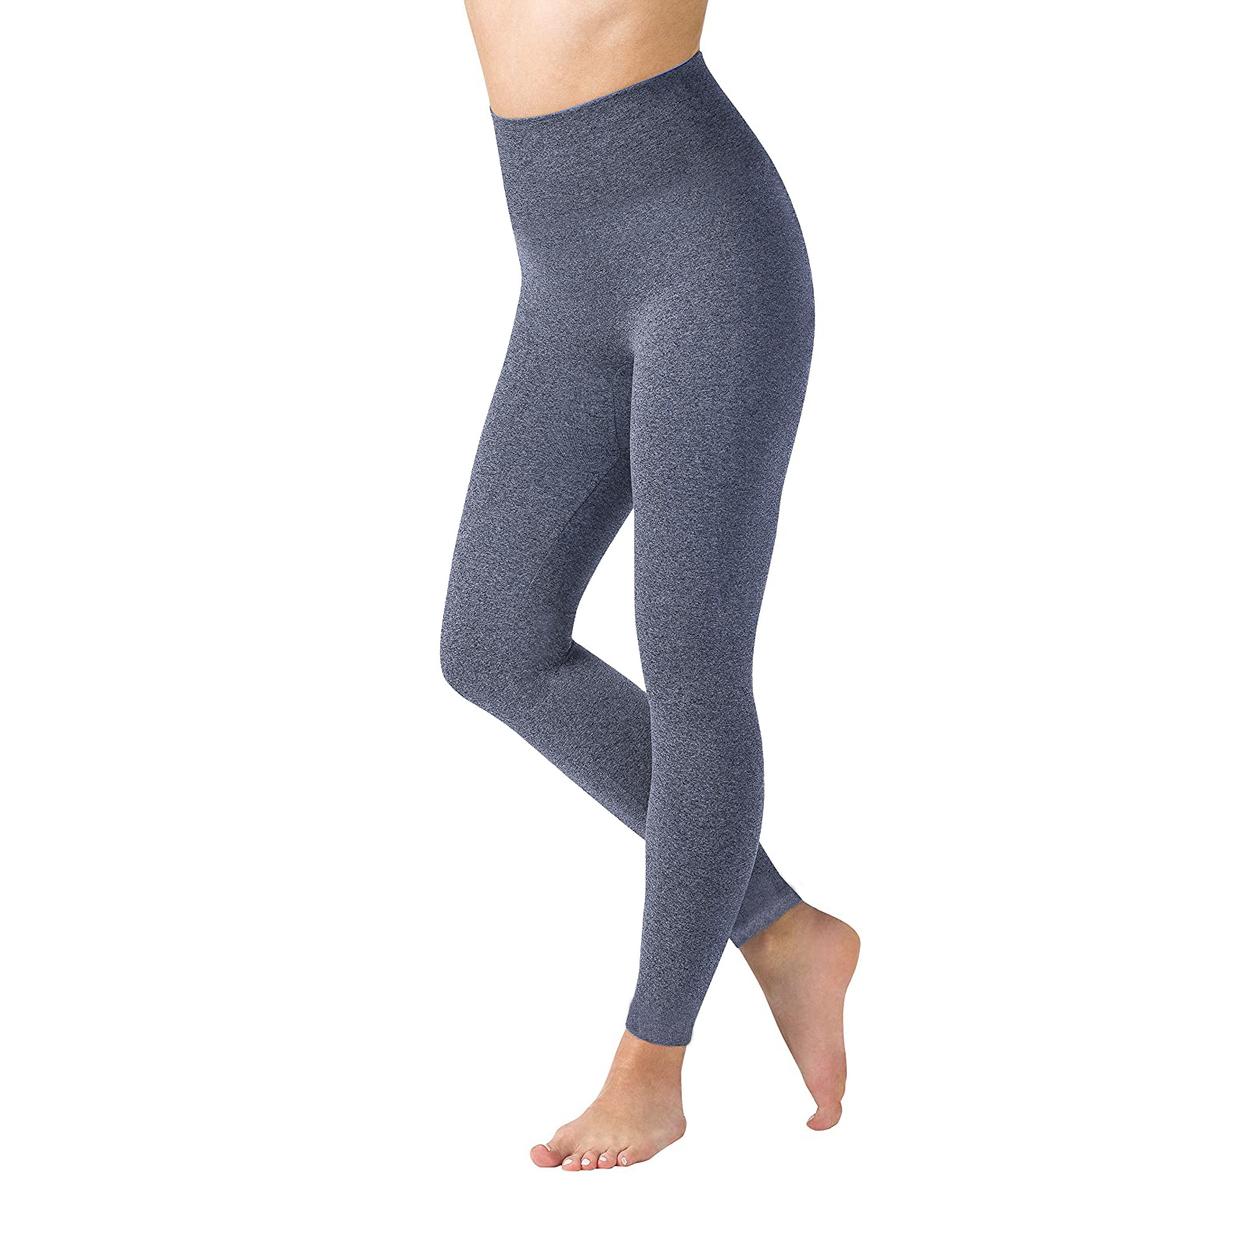 Multi-Pack: Women's High Waisted Ultra-Soft Fleece Lined Warm Marled Leggings(Available In Plus Sizes) - 1-pack, Navy, Medium